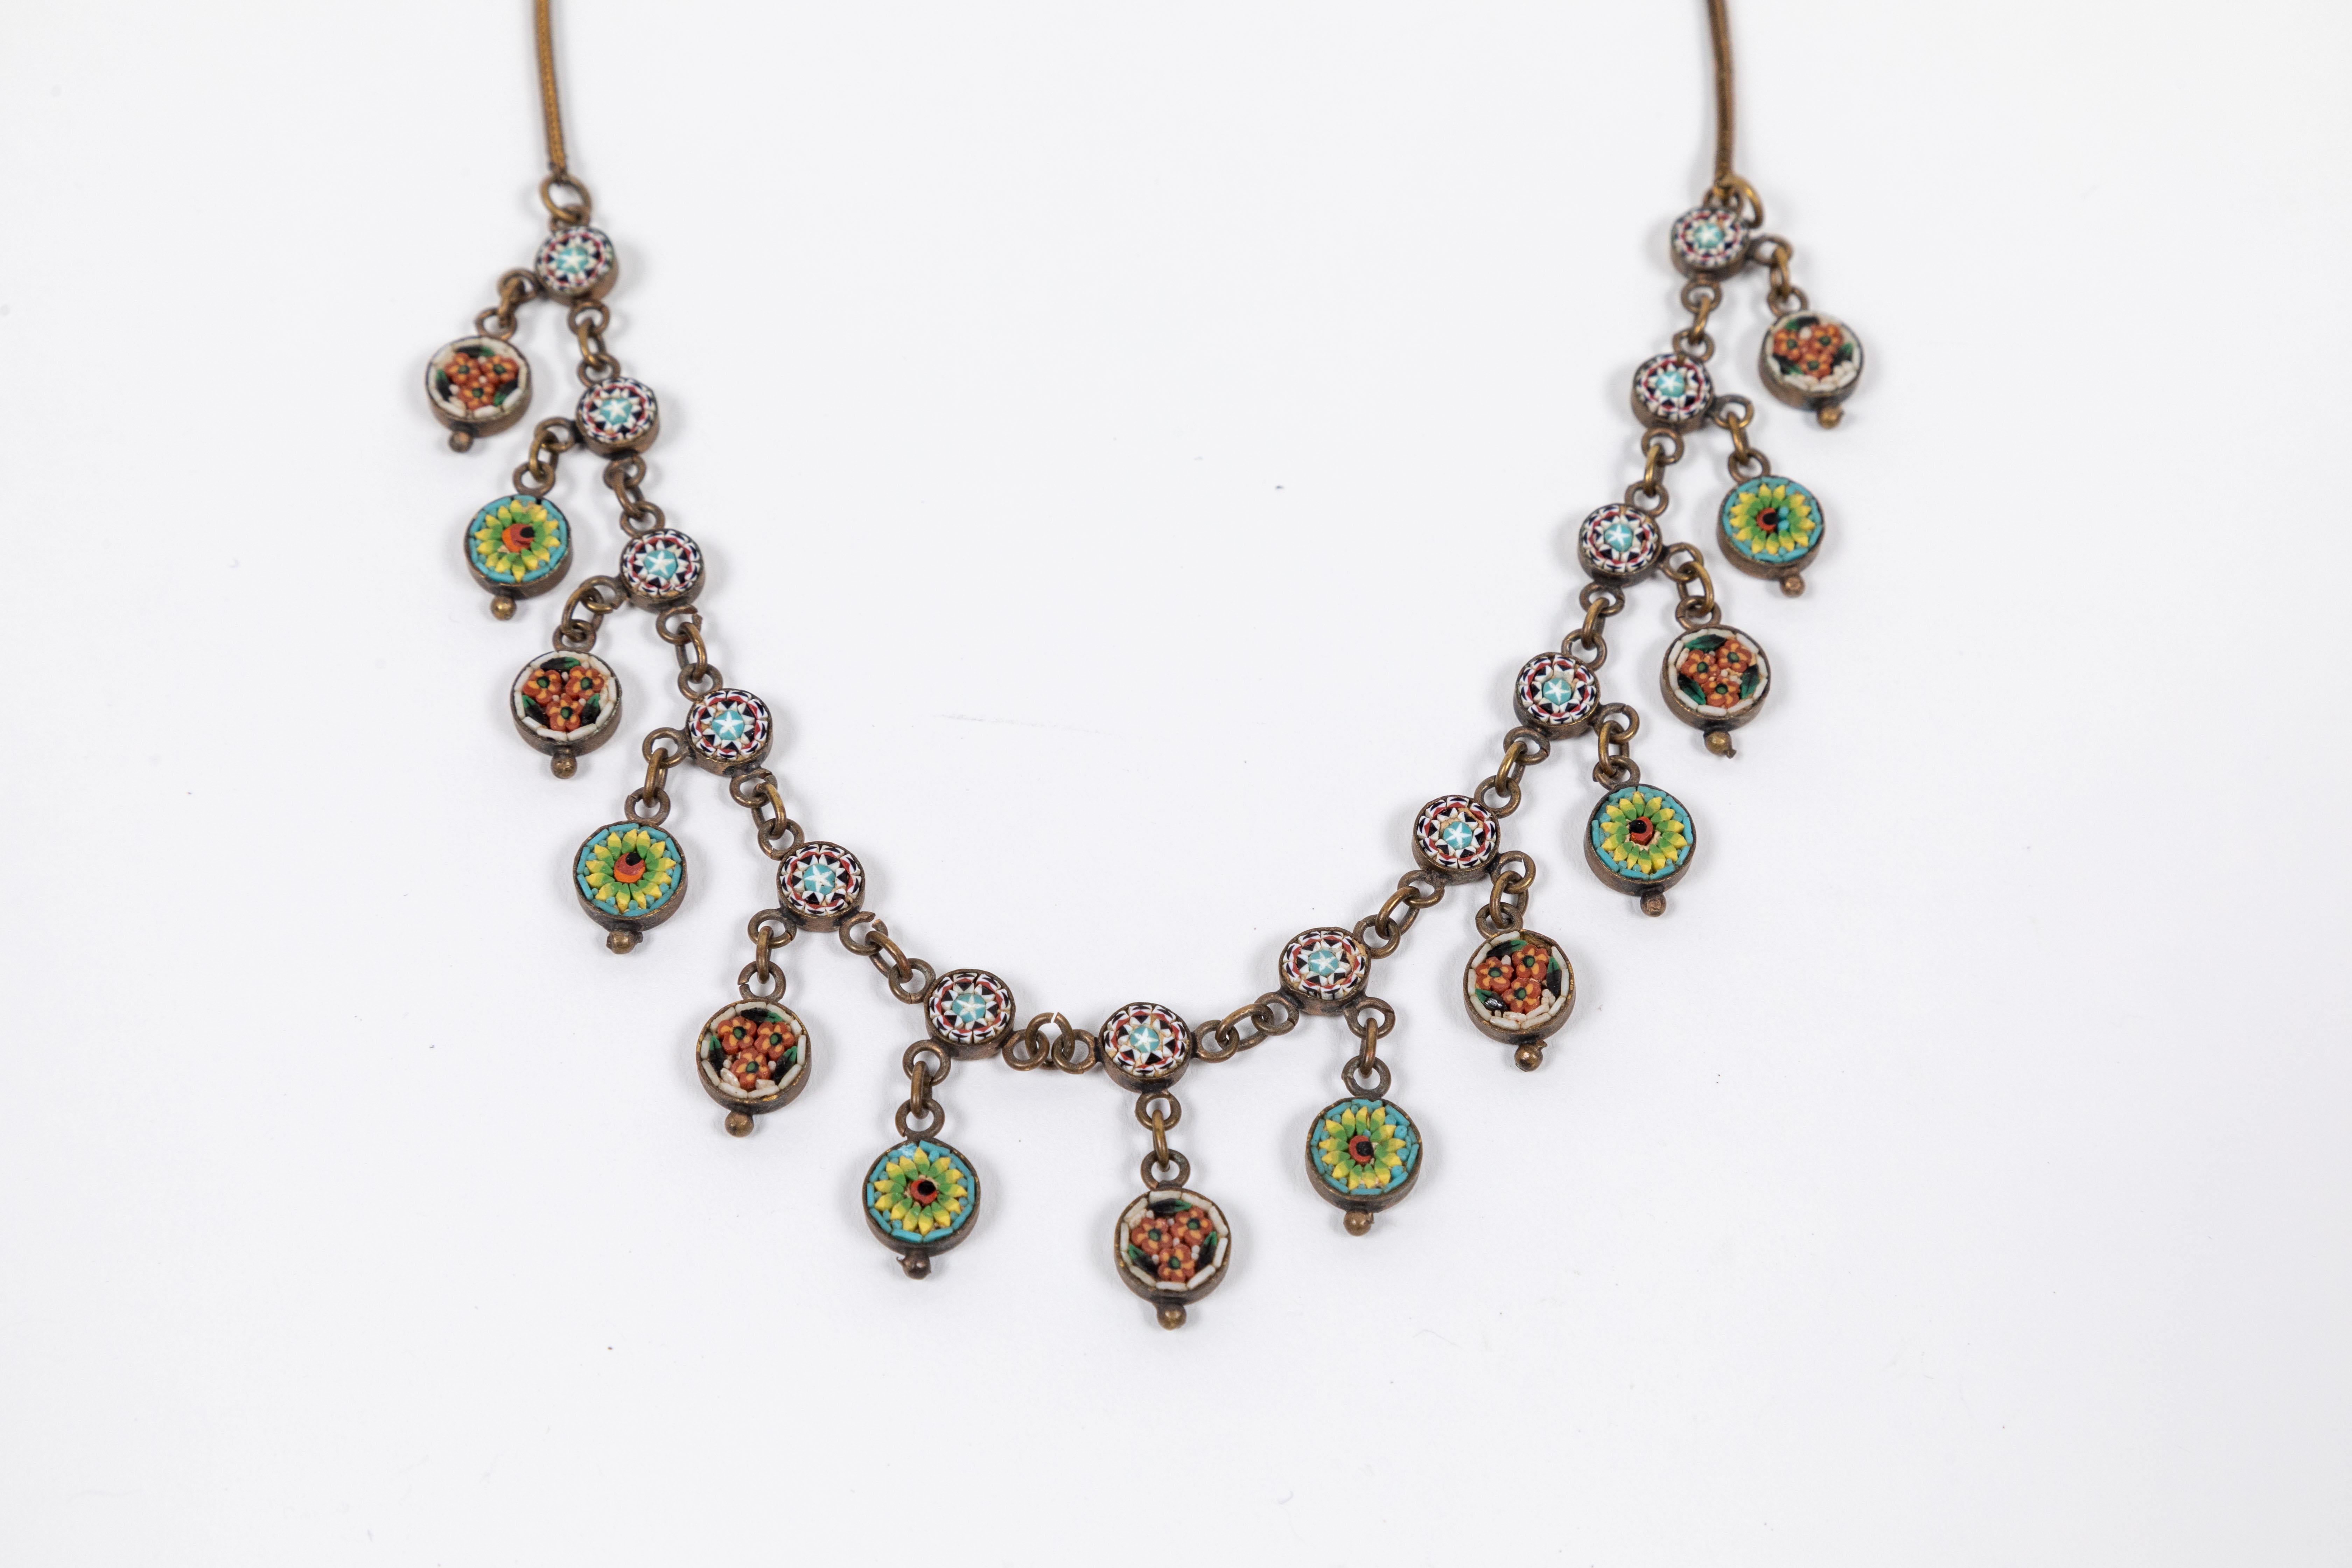 Fabulous Antique Micro Mosaic necklace with 13 multi-color floral design round mosaic drops attached to a chain with hook and eye closure. (c. late 1800s)
Total length is 16